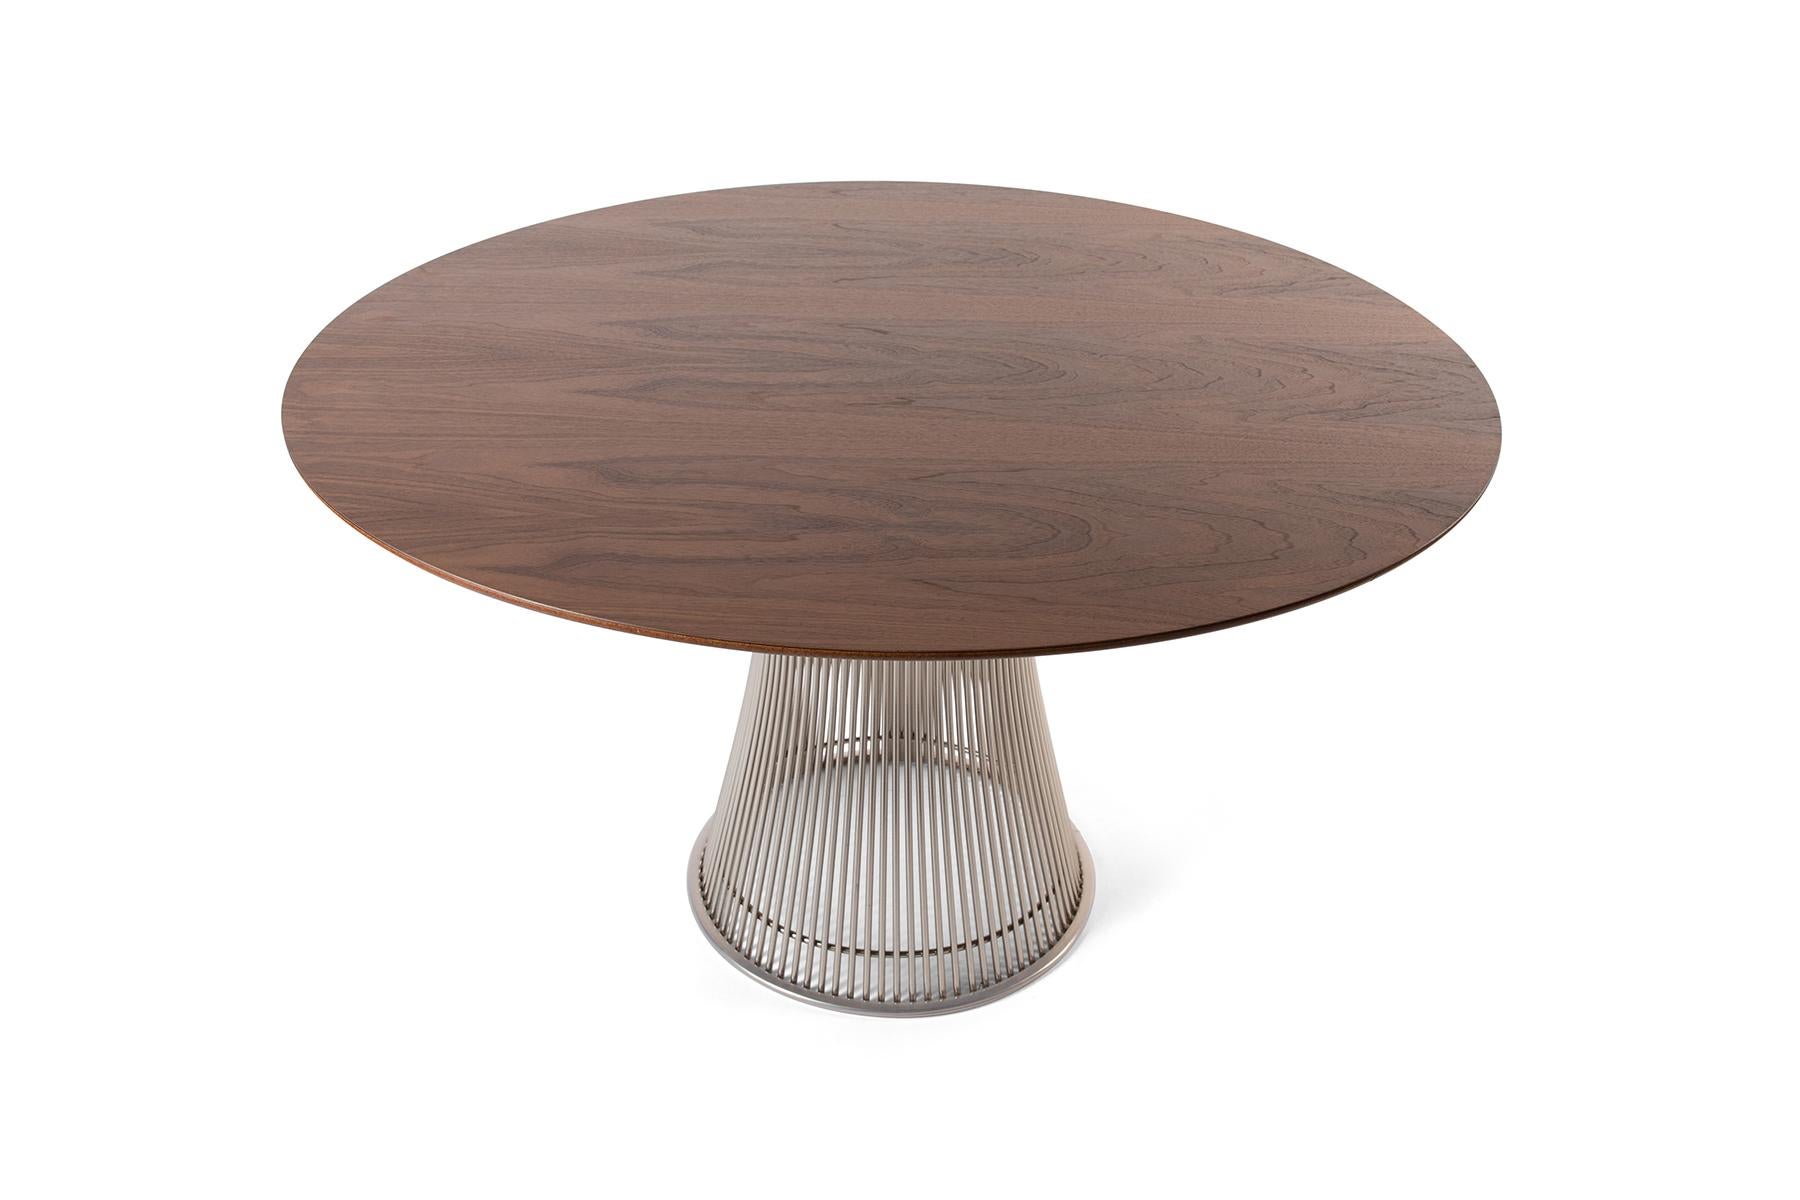 Warren Platner welded steel rod base with beautifully grained walnut top circa late 1960's. Purchased from the original owners. Top has been newly finished.